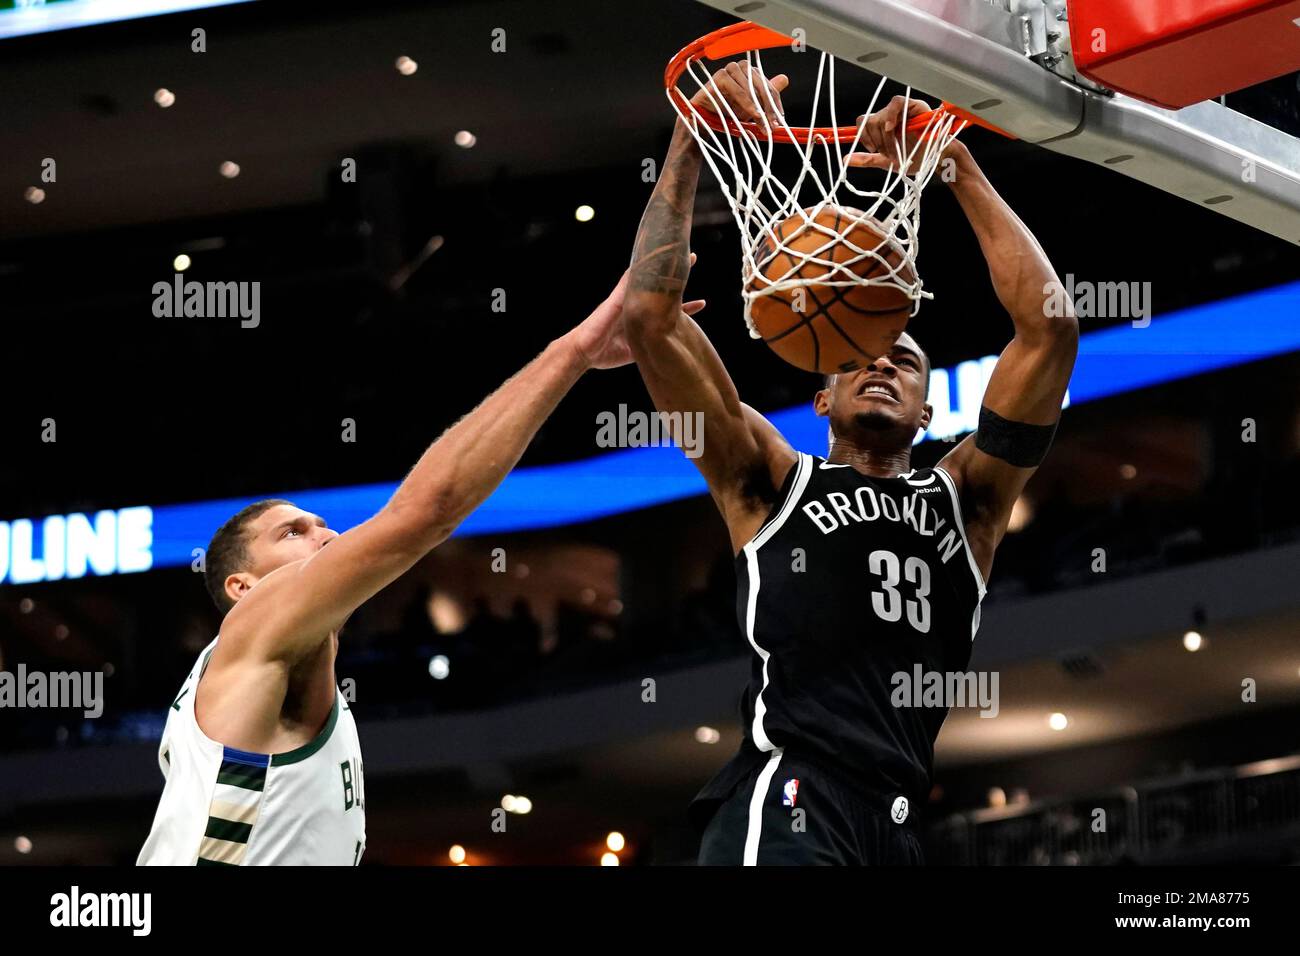 Nic Claxton dunks EVERYTHING for the Brooklyn Nets